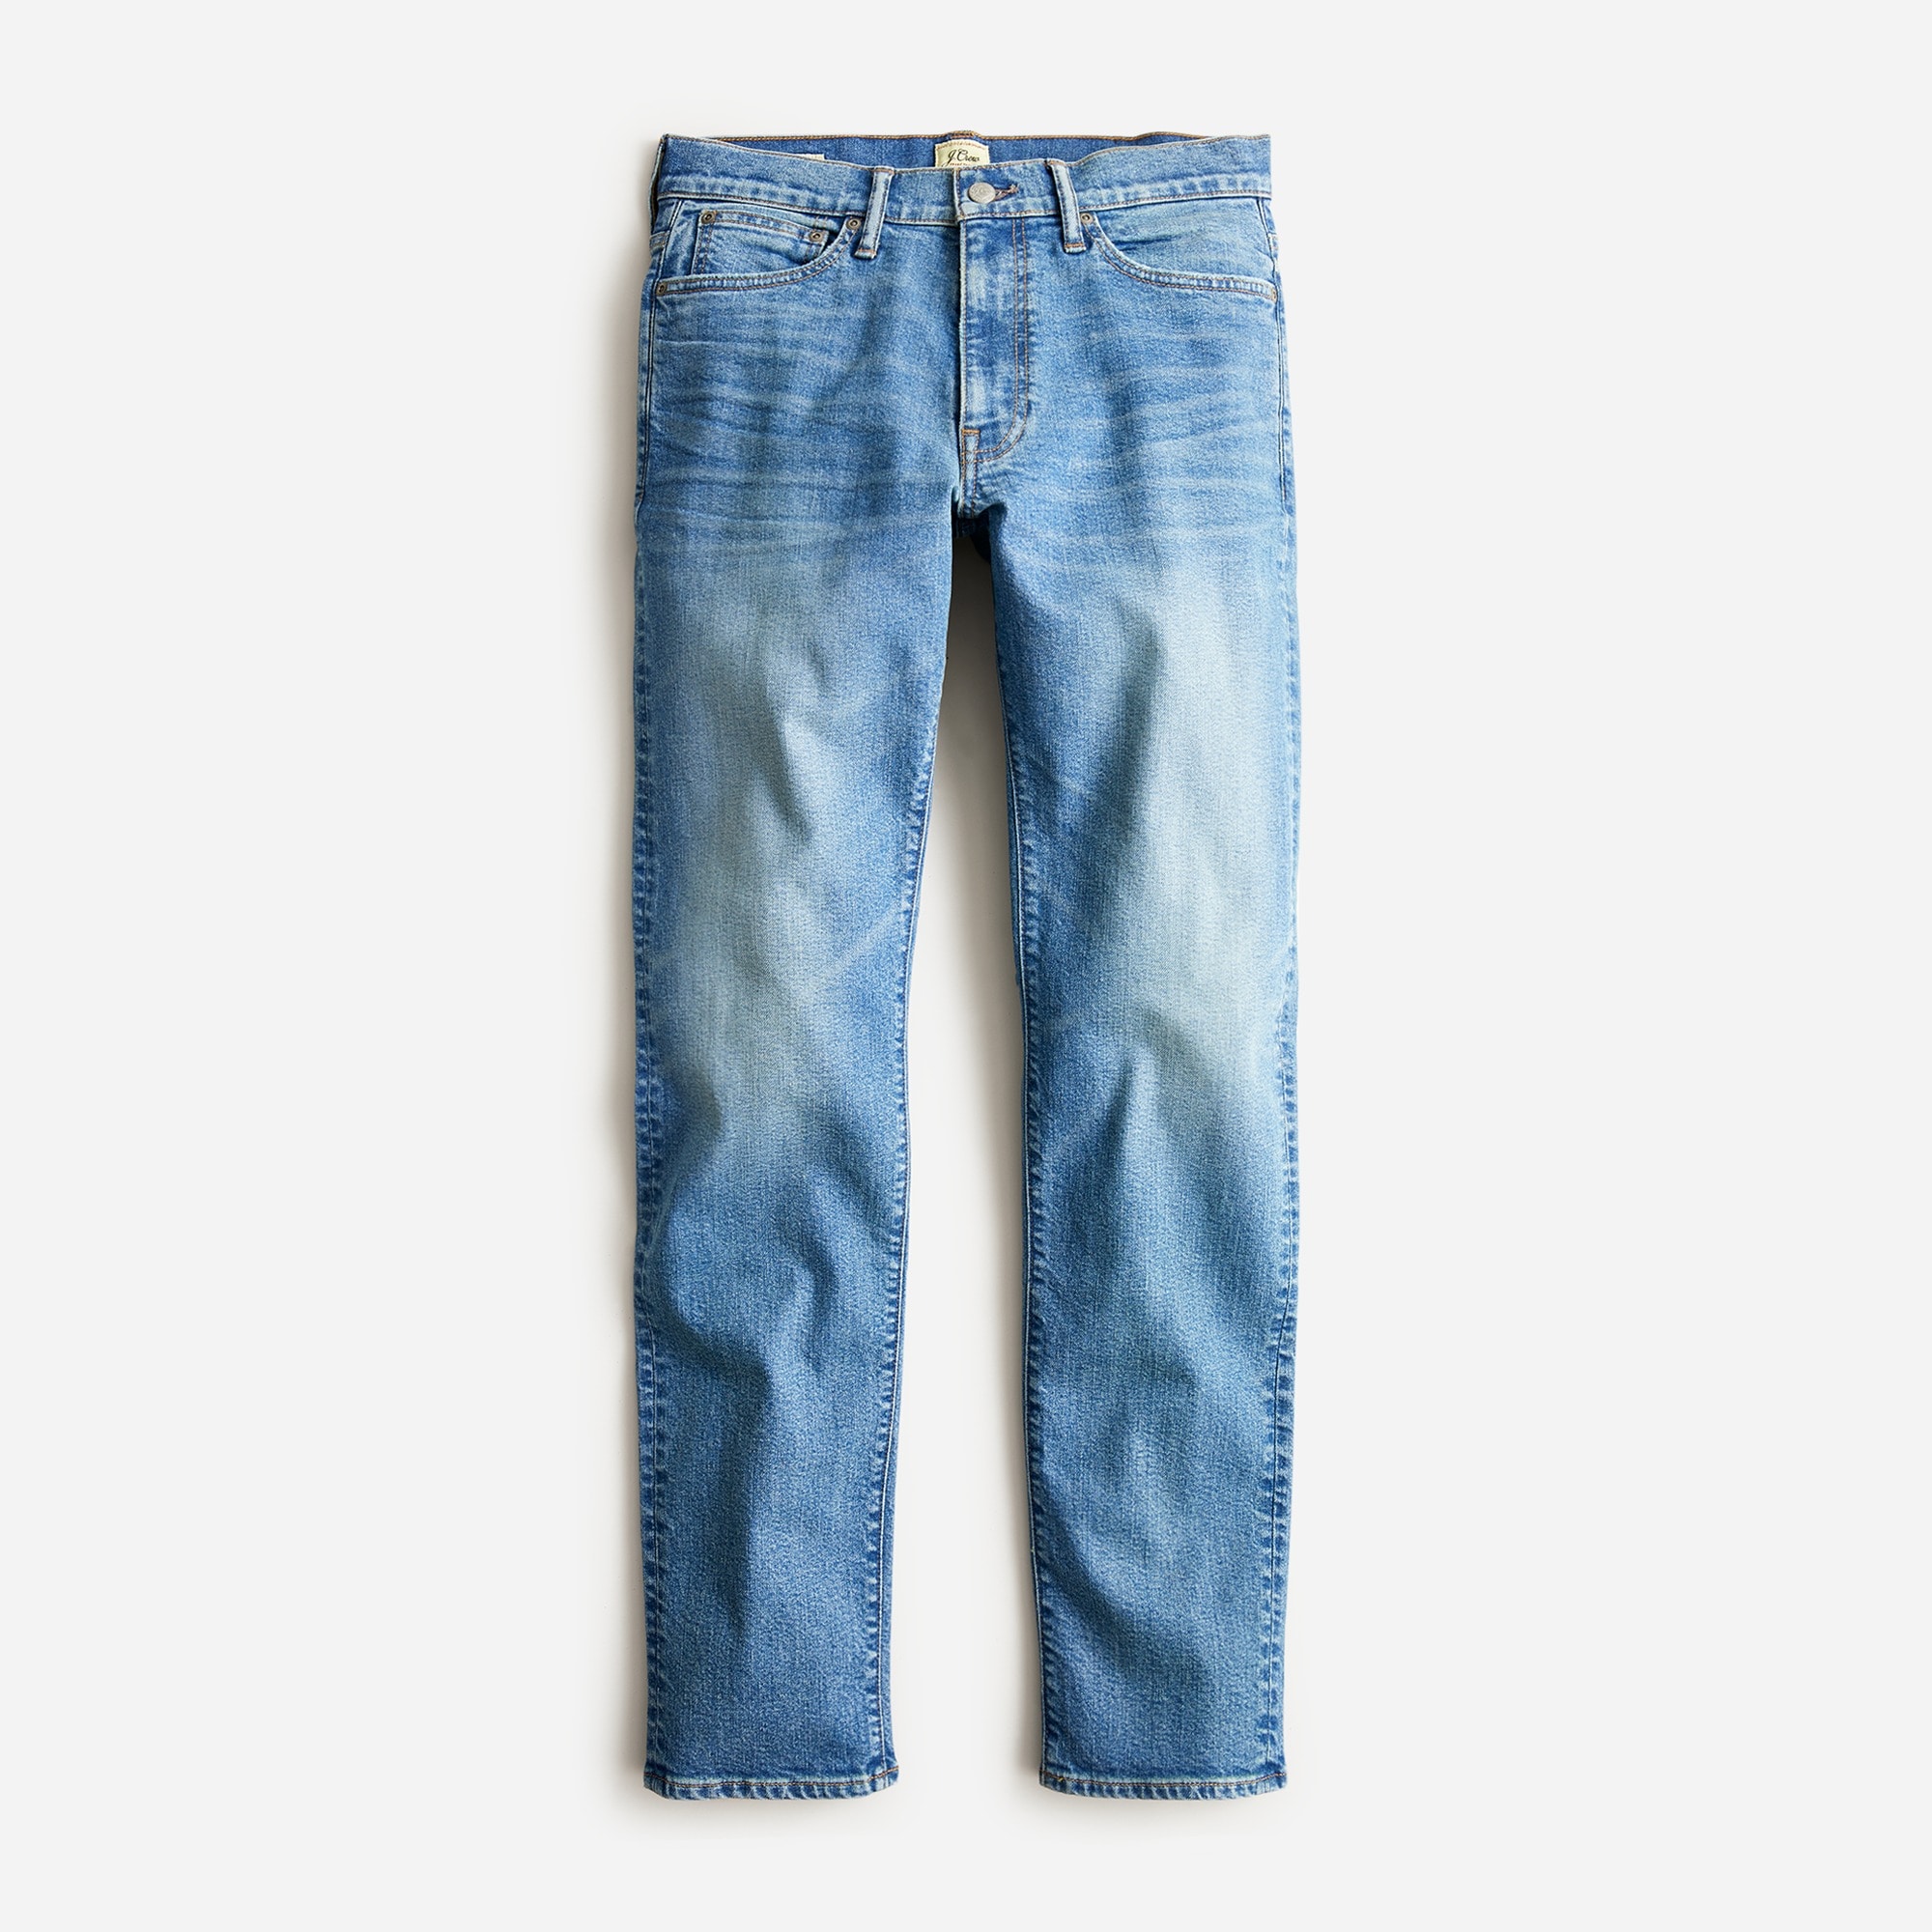  1040 Athletic Tapered-fit stretch jean in three-year wash